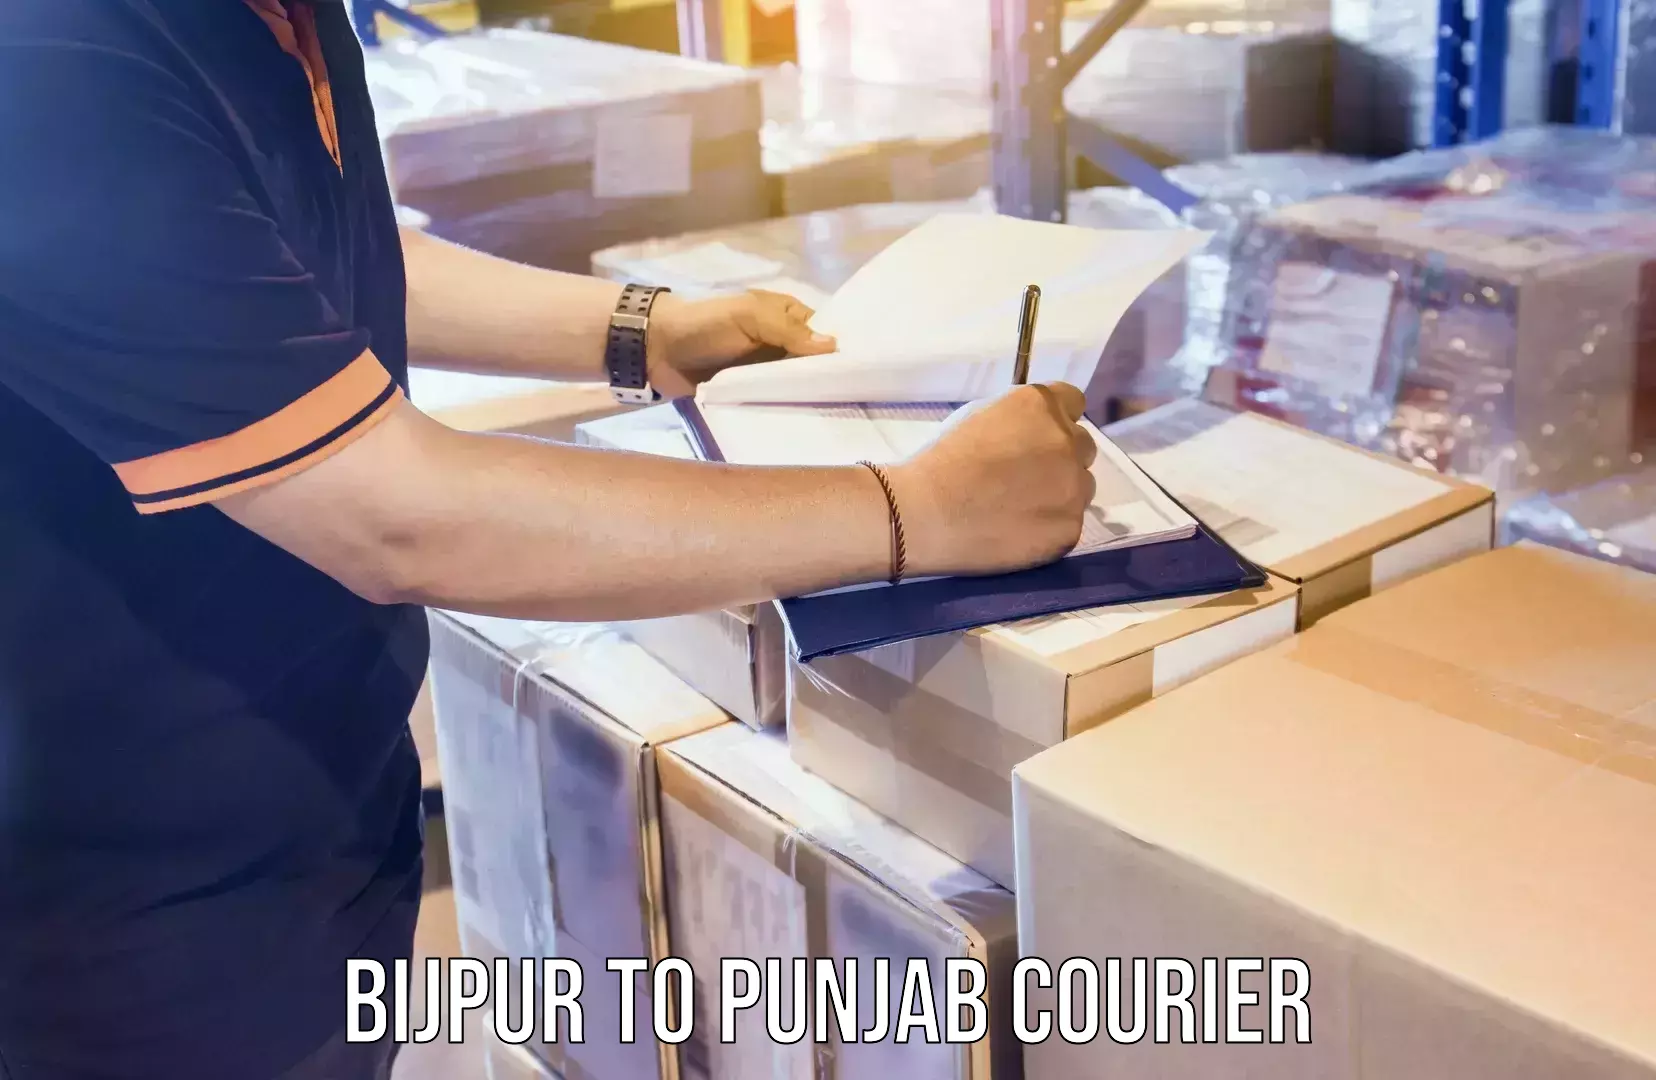 Next-day delivery options Bijpur to Punjab